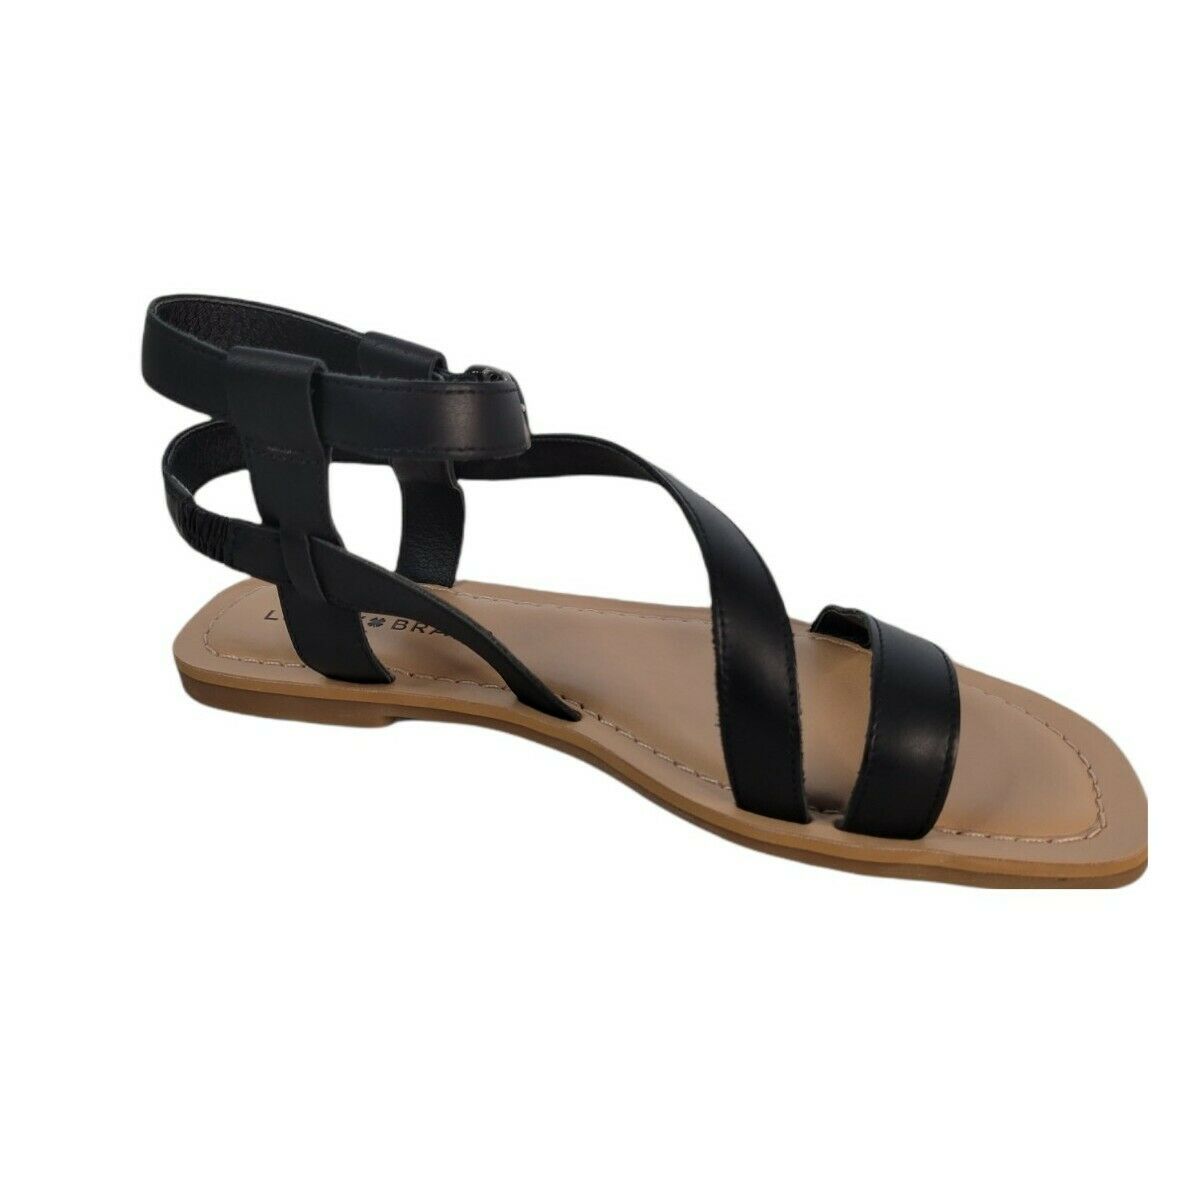 NEW-LUCKY BRAND Byleth Gladiator Shoes Leather Sandals, Black Size (7) Medium